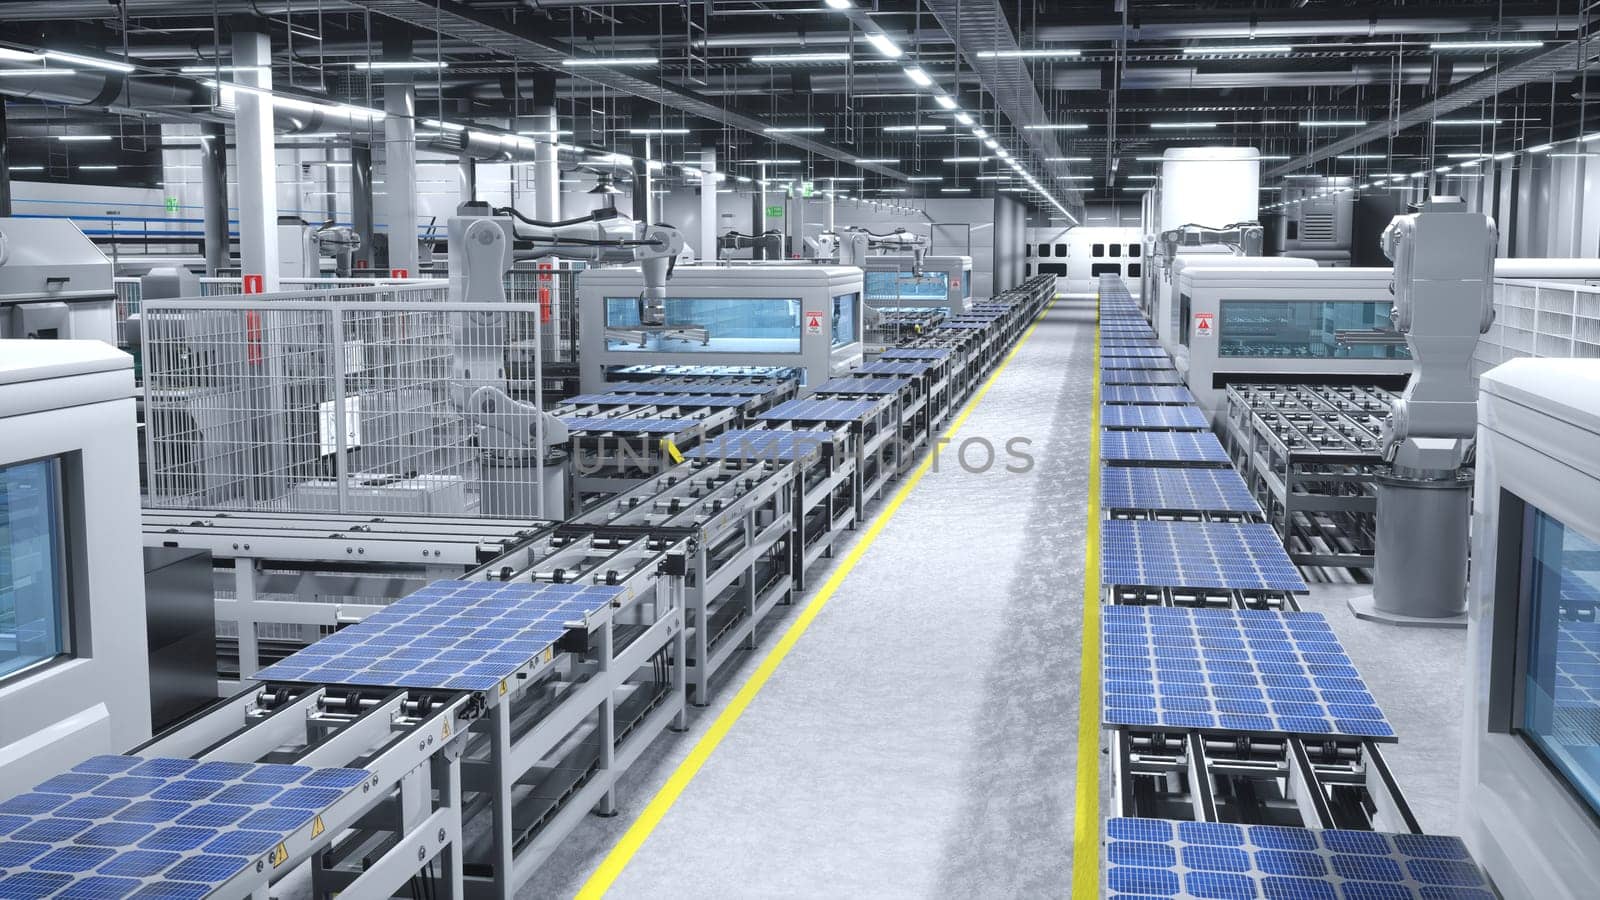 Industrial solar panel factory with robotic arms placing photovoltaic modules on conveyor belts, 3D render. High tech manufacturing warehouse producing solar cells for sustainable energy industry